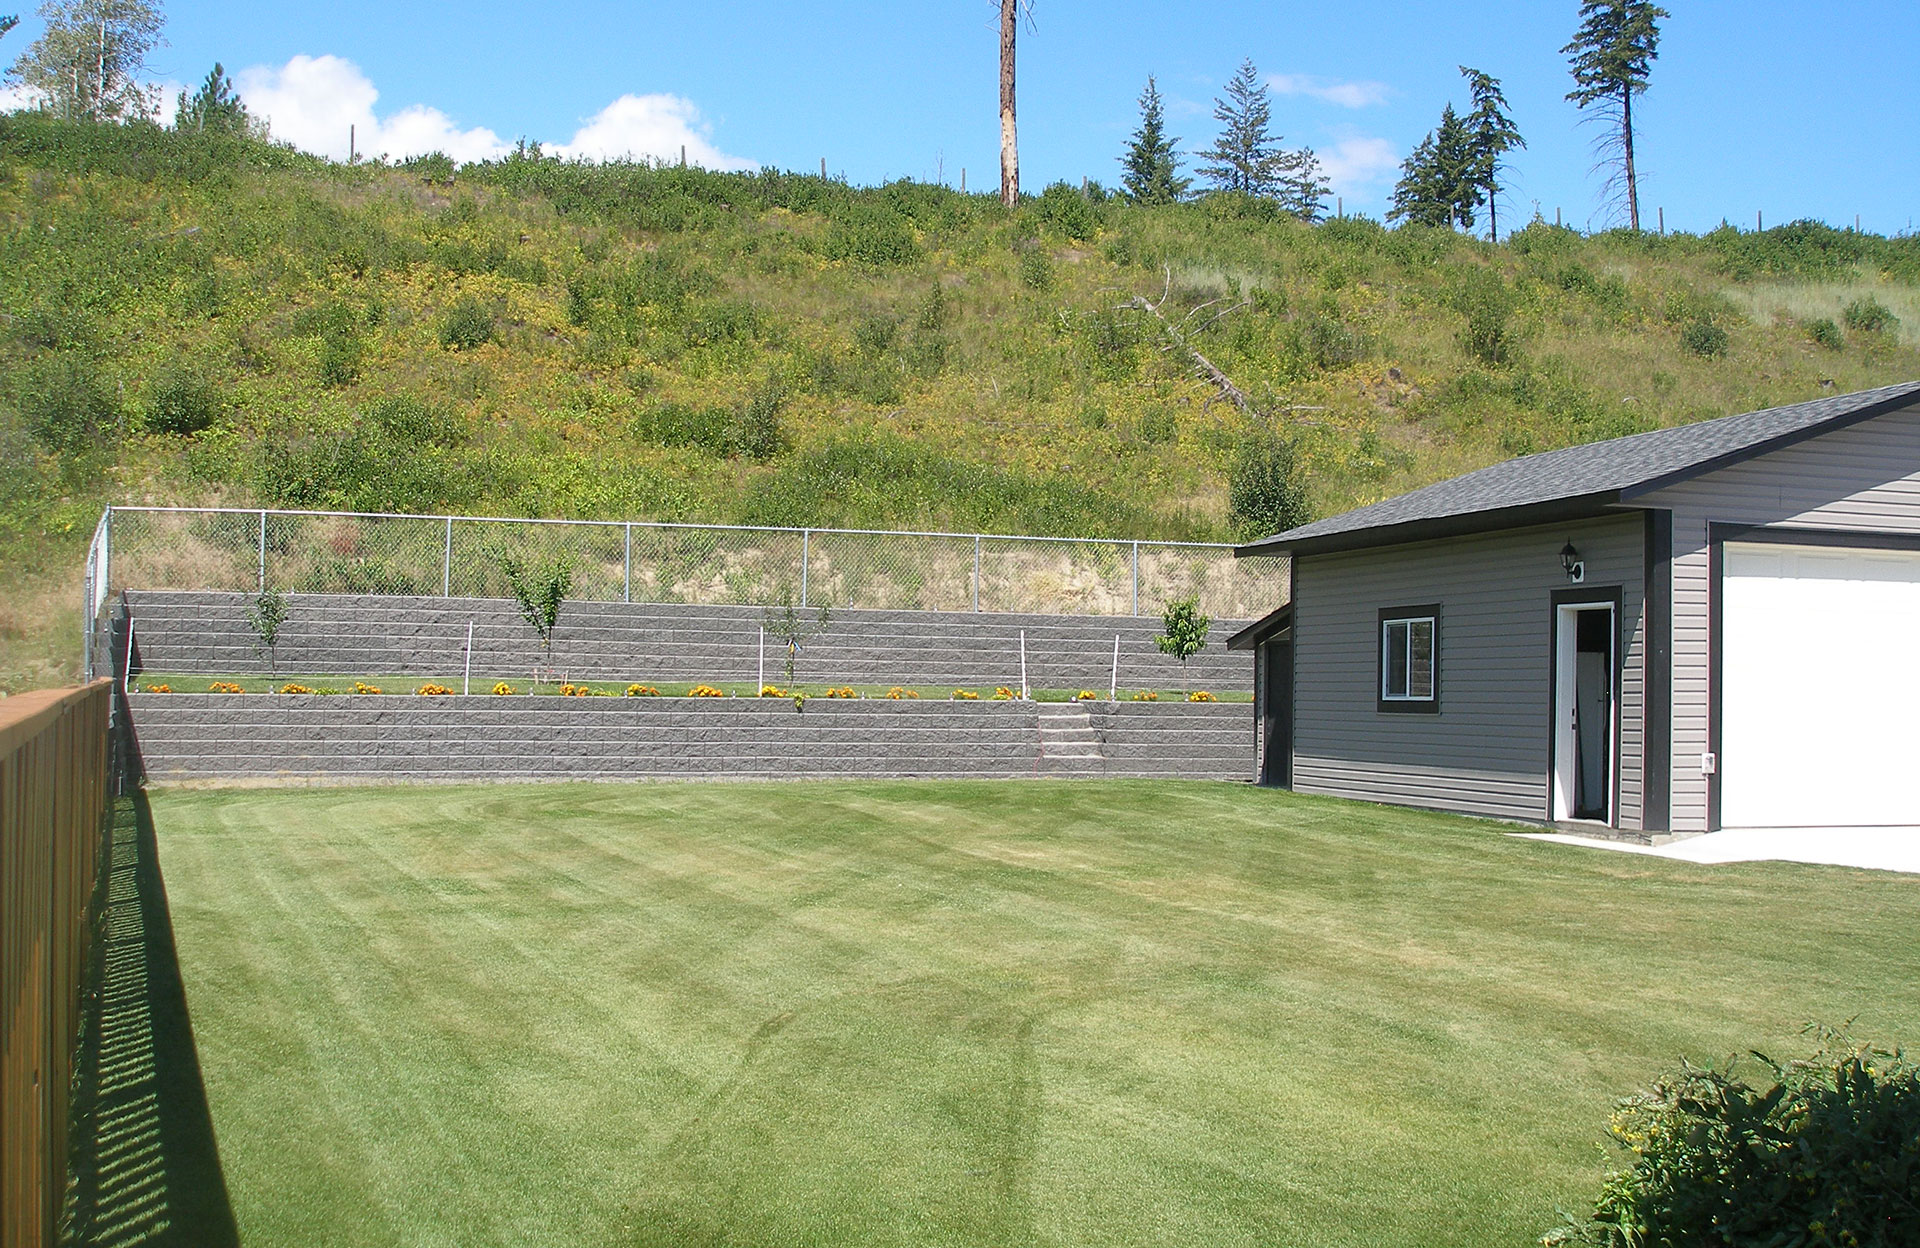 Retaining wall installation project complete